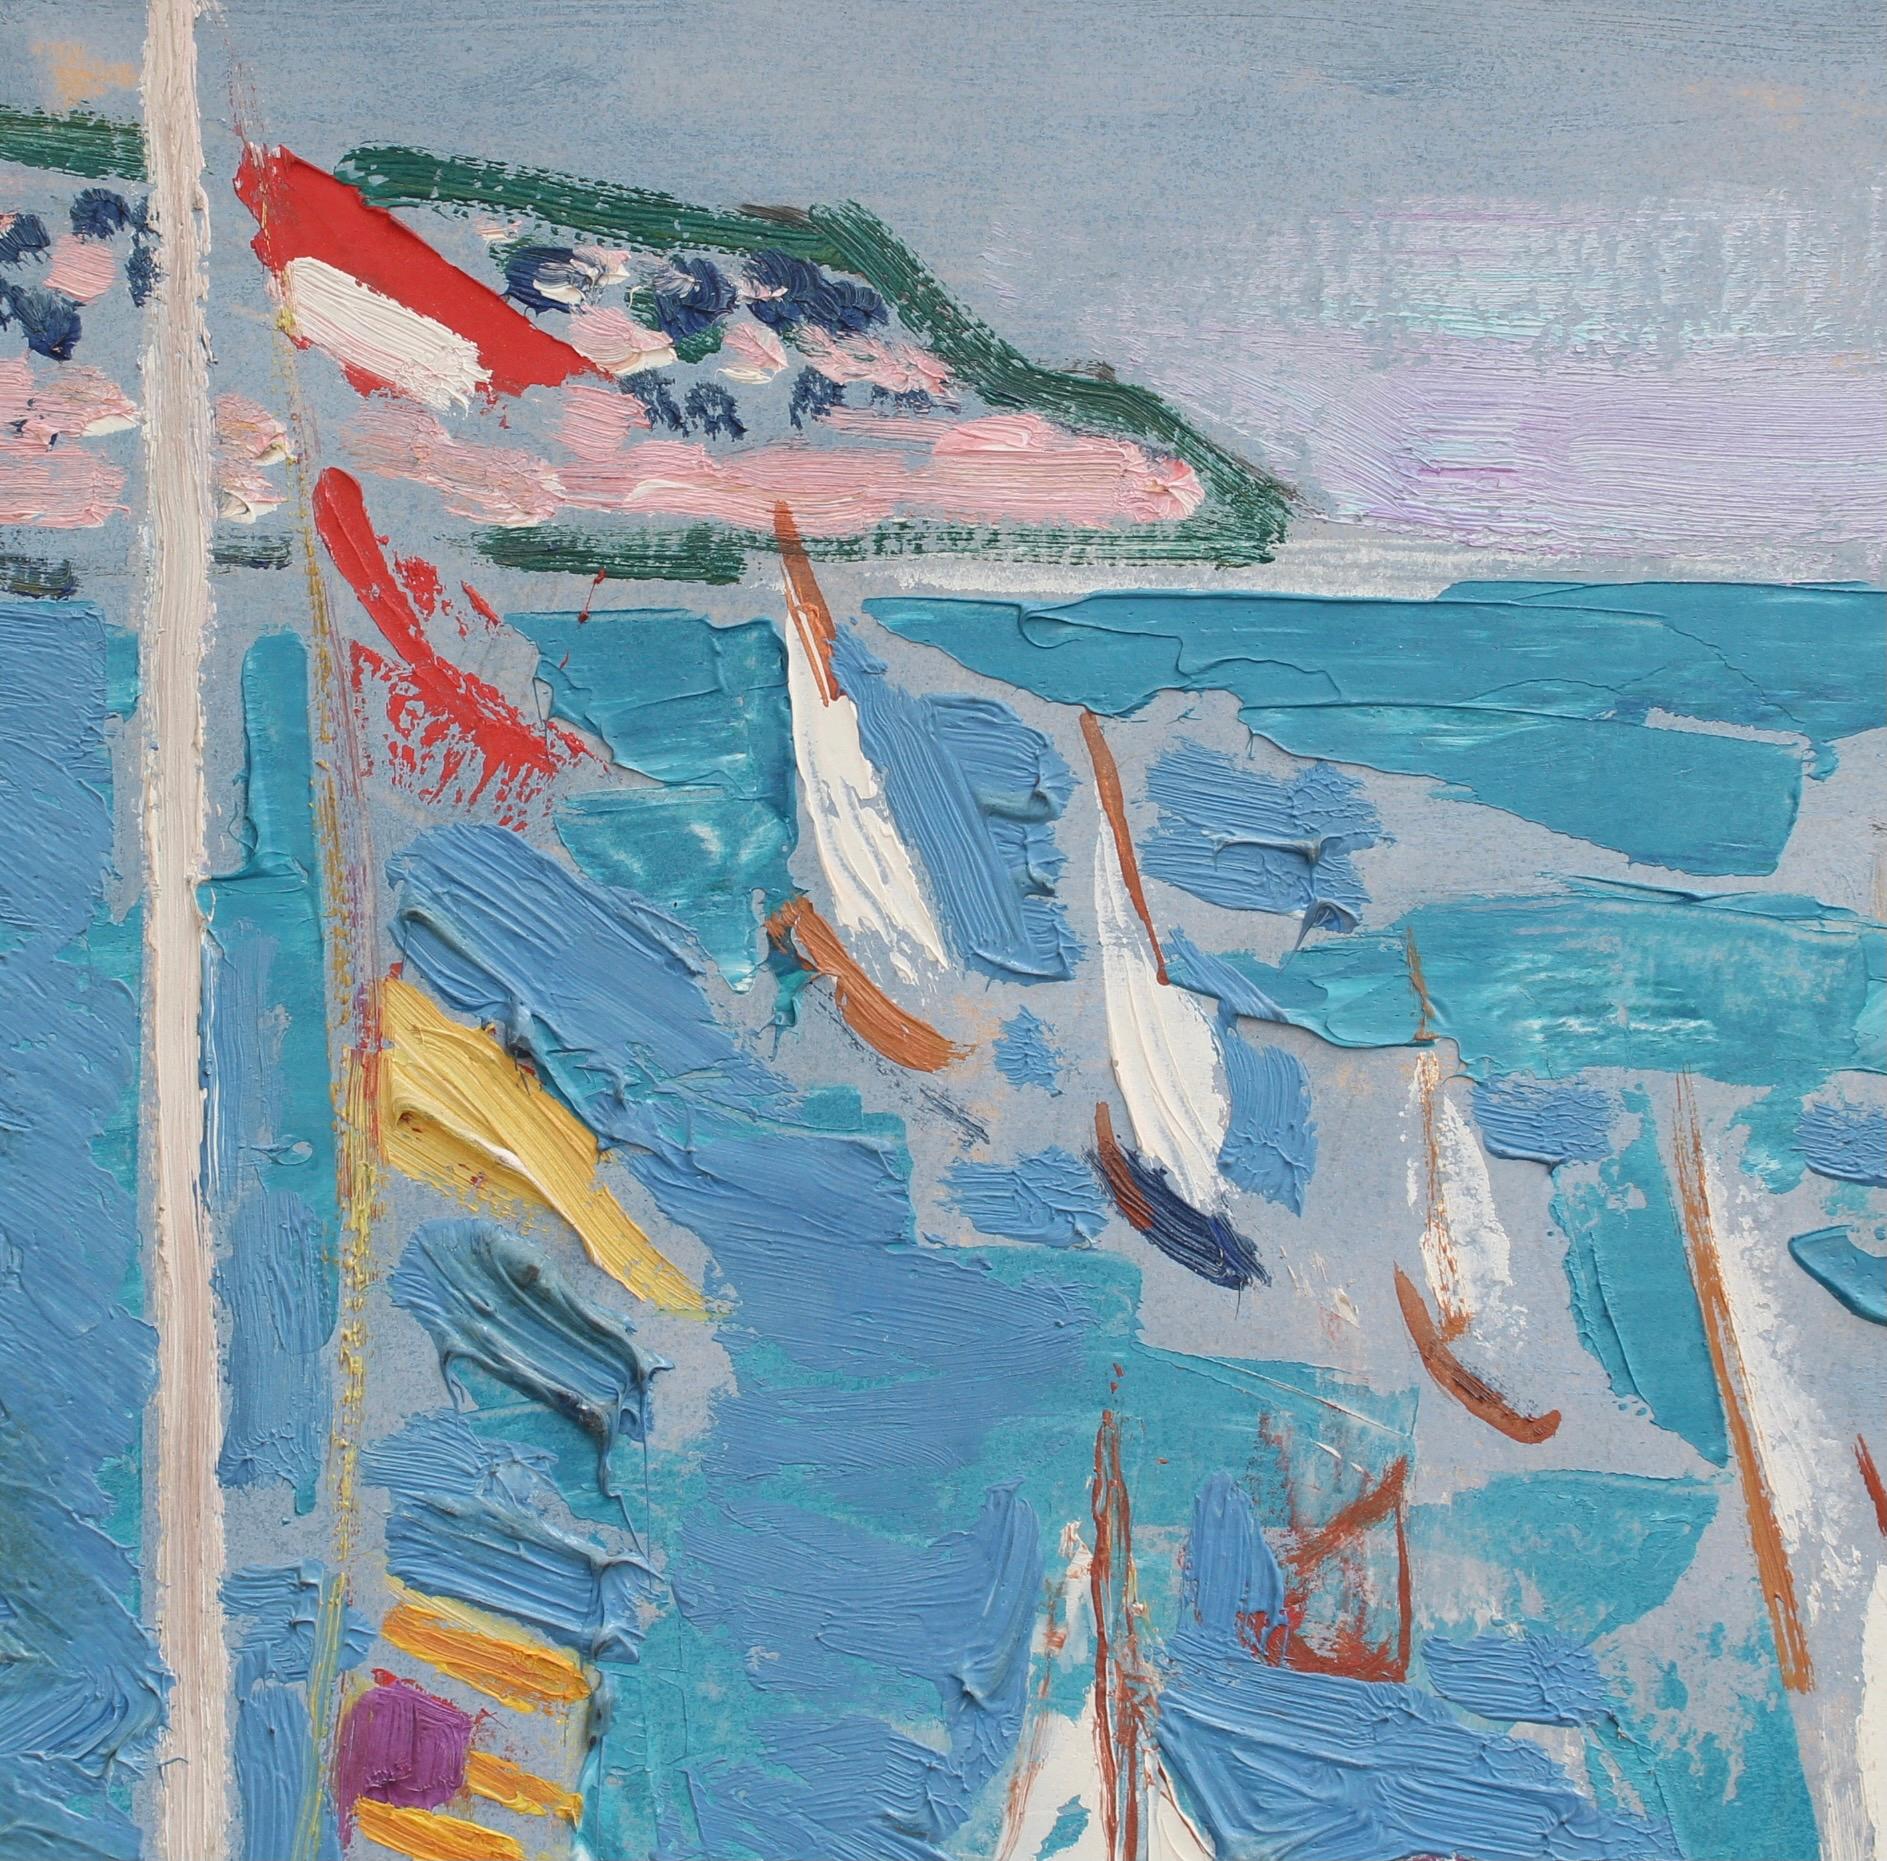 'Women on the Terrace', oil on paper (bonded to canvas), by Roger Limouse (circa 1960s). This artwork renders in impasto the exuberant colours of the Côtes d'Azur. A woman of leisure on a terrace overlooks the exhilarating start of a sailing regatta